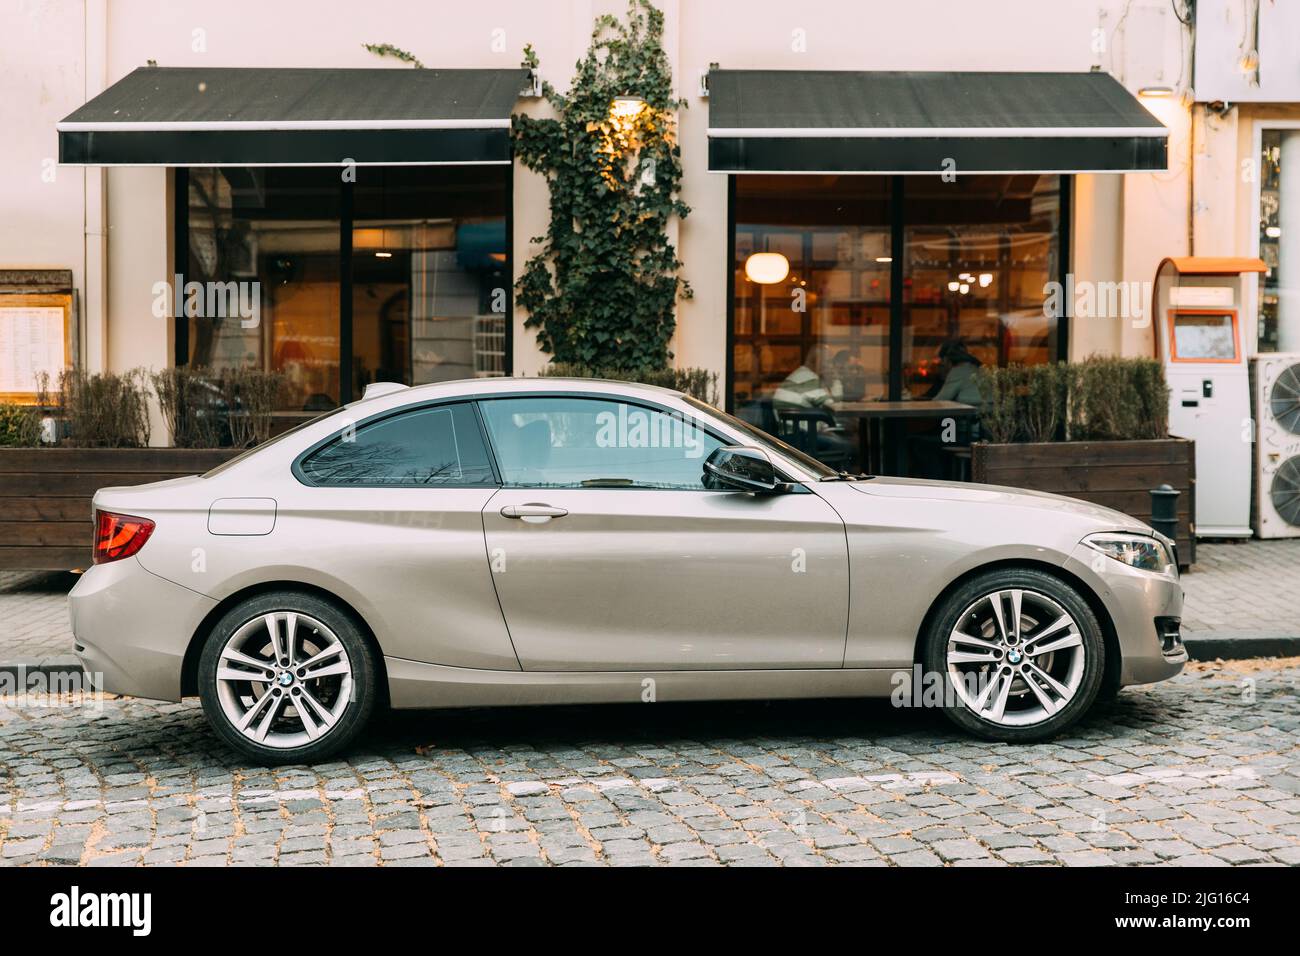 https://c8.alamy.com/comp/2JG16C4/tbilisi-georgia-march-28-2022-view-of-white-bmw-2-series-f22-german-executive-car-fast-modern-2-door-coupe-parked-on-street-of-tbilisi-2JG16C4.jpg